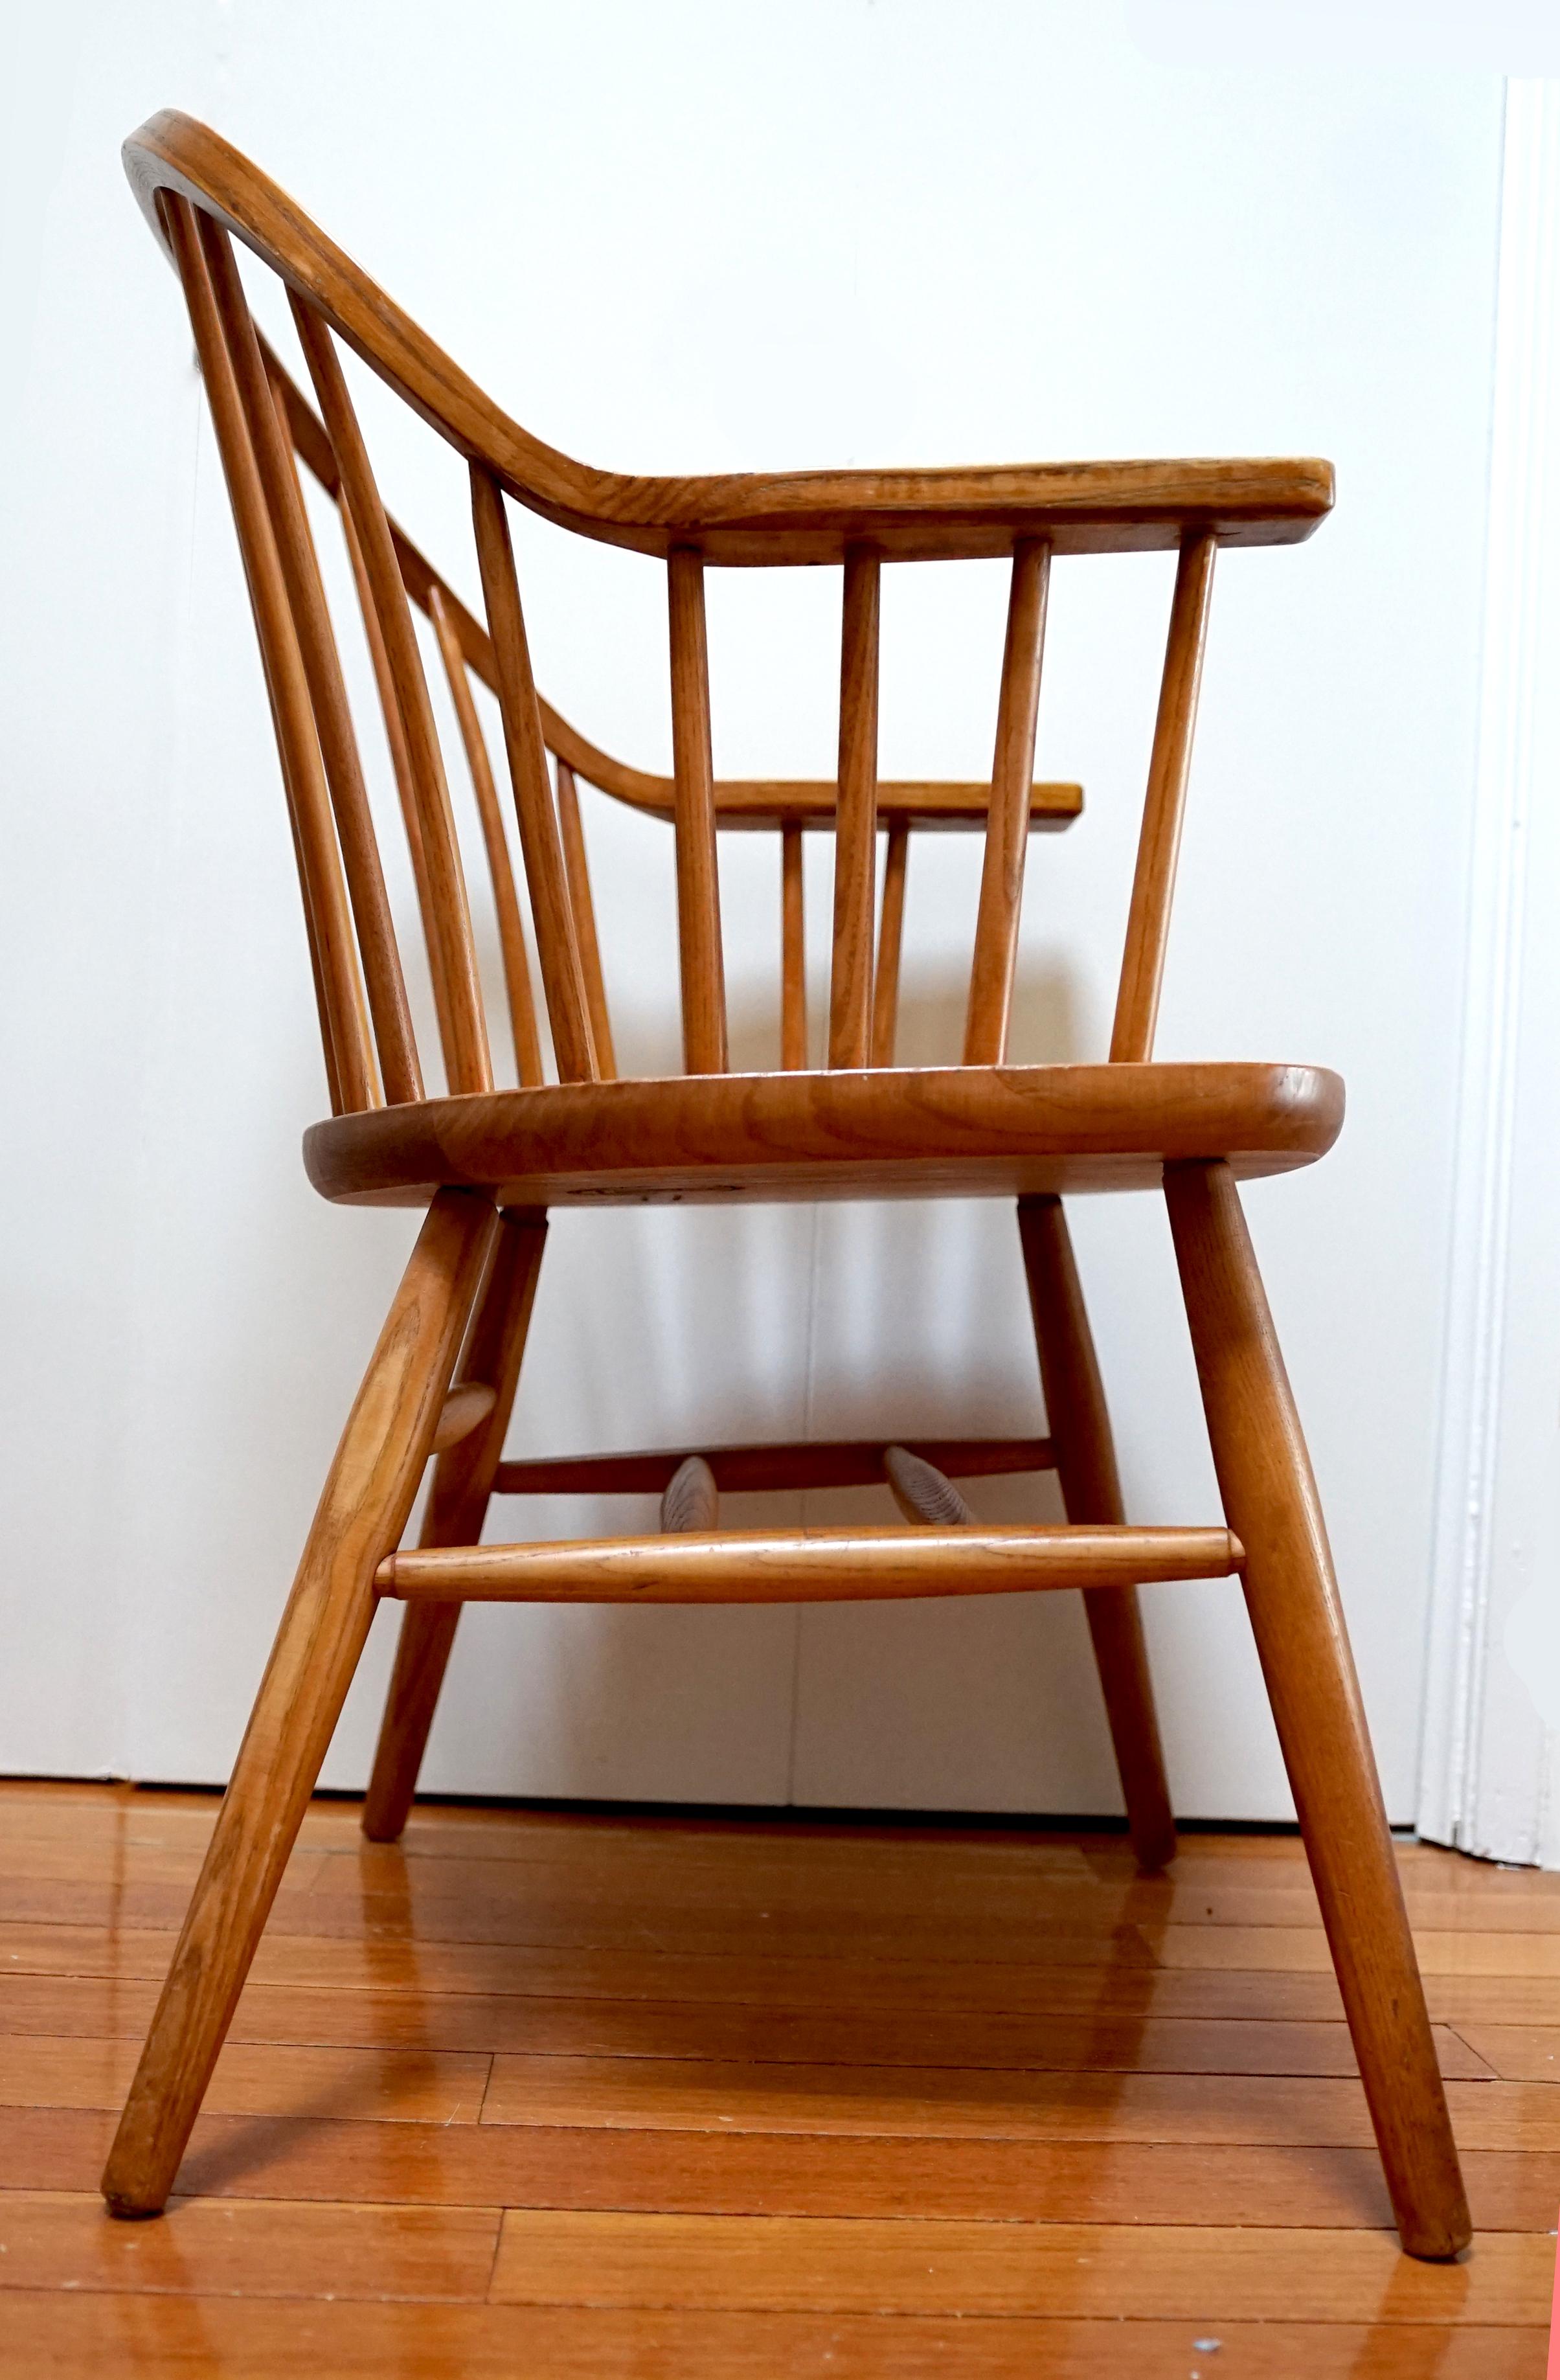 American Classical Set of 8 Nichols and Stone Claud Bunyard Signed Windsor Midcentury Chairs